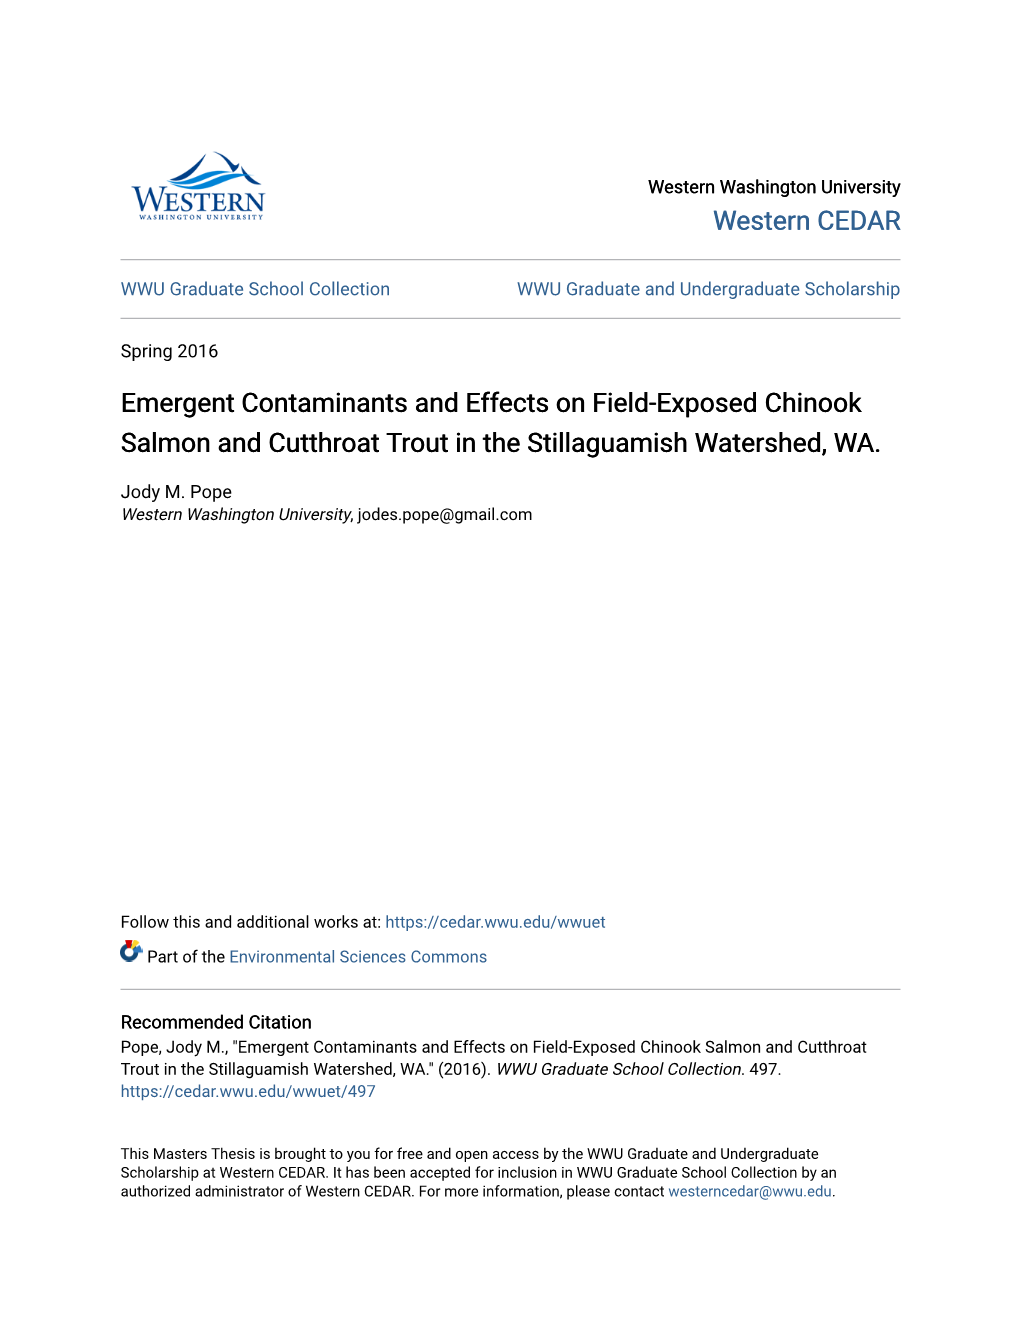 Emergent Contaminants and Effects on Field-Exposed Chinook Salmon and Cutthroat Trout in the Stillaguamish Watershed, WA